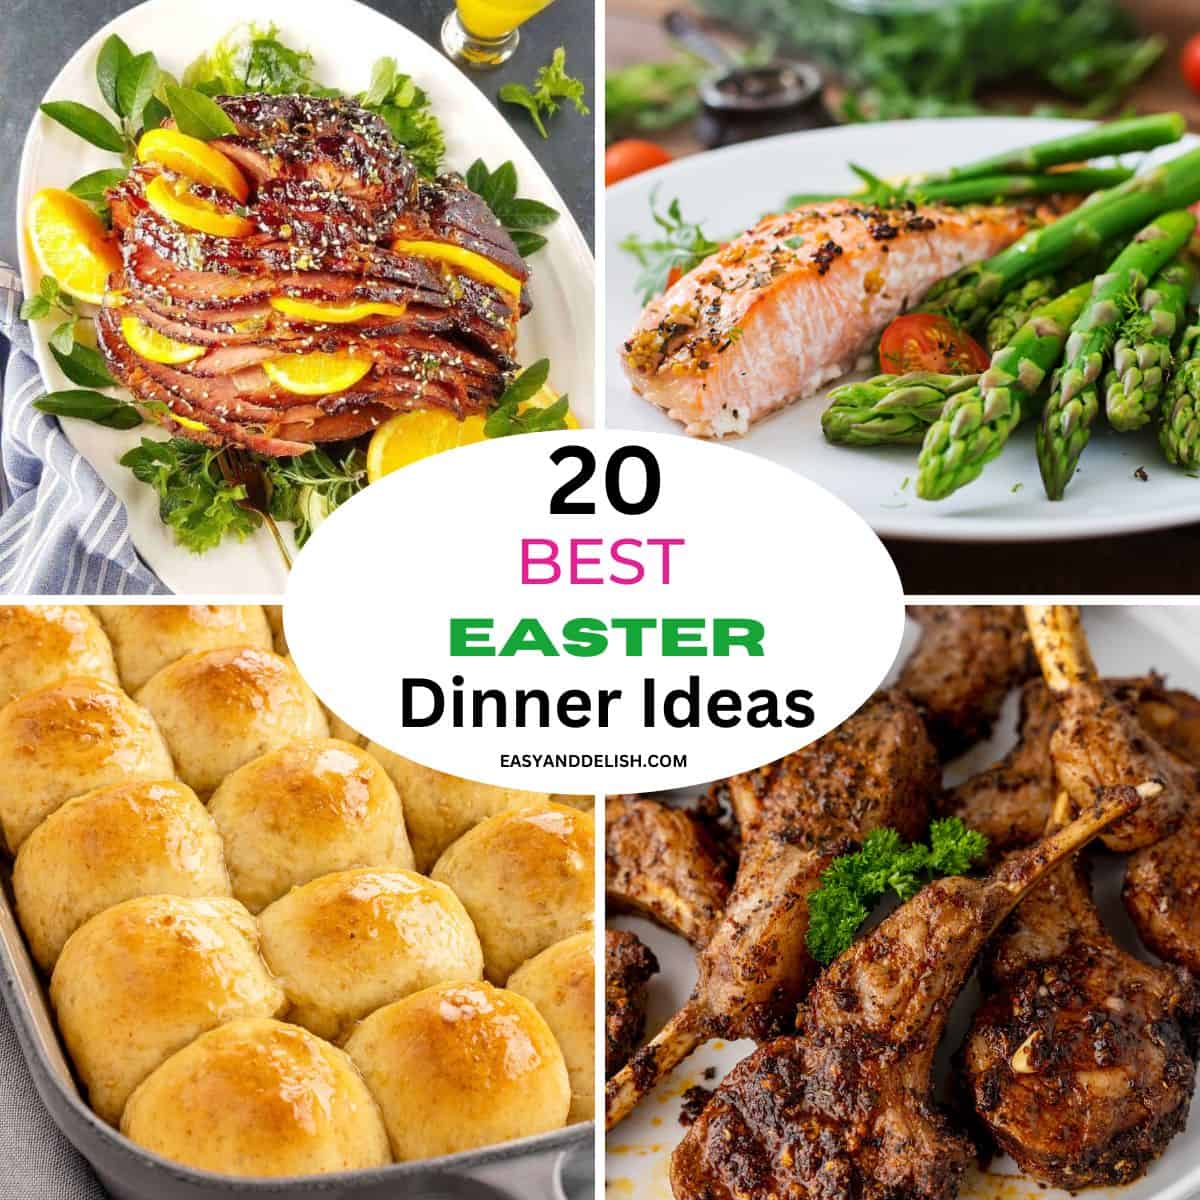 Collage showing 4 out of 20 best Easter dinner ideas.